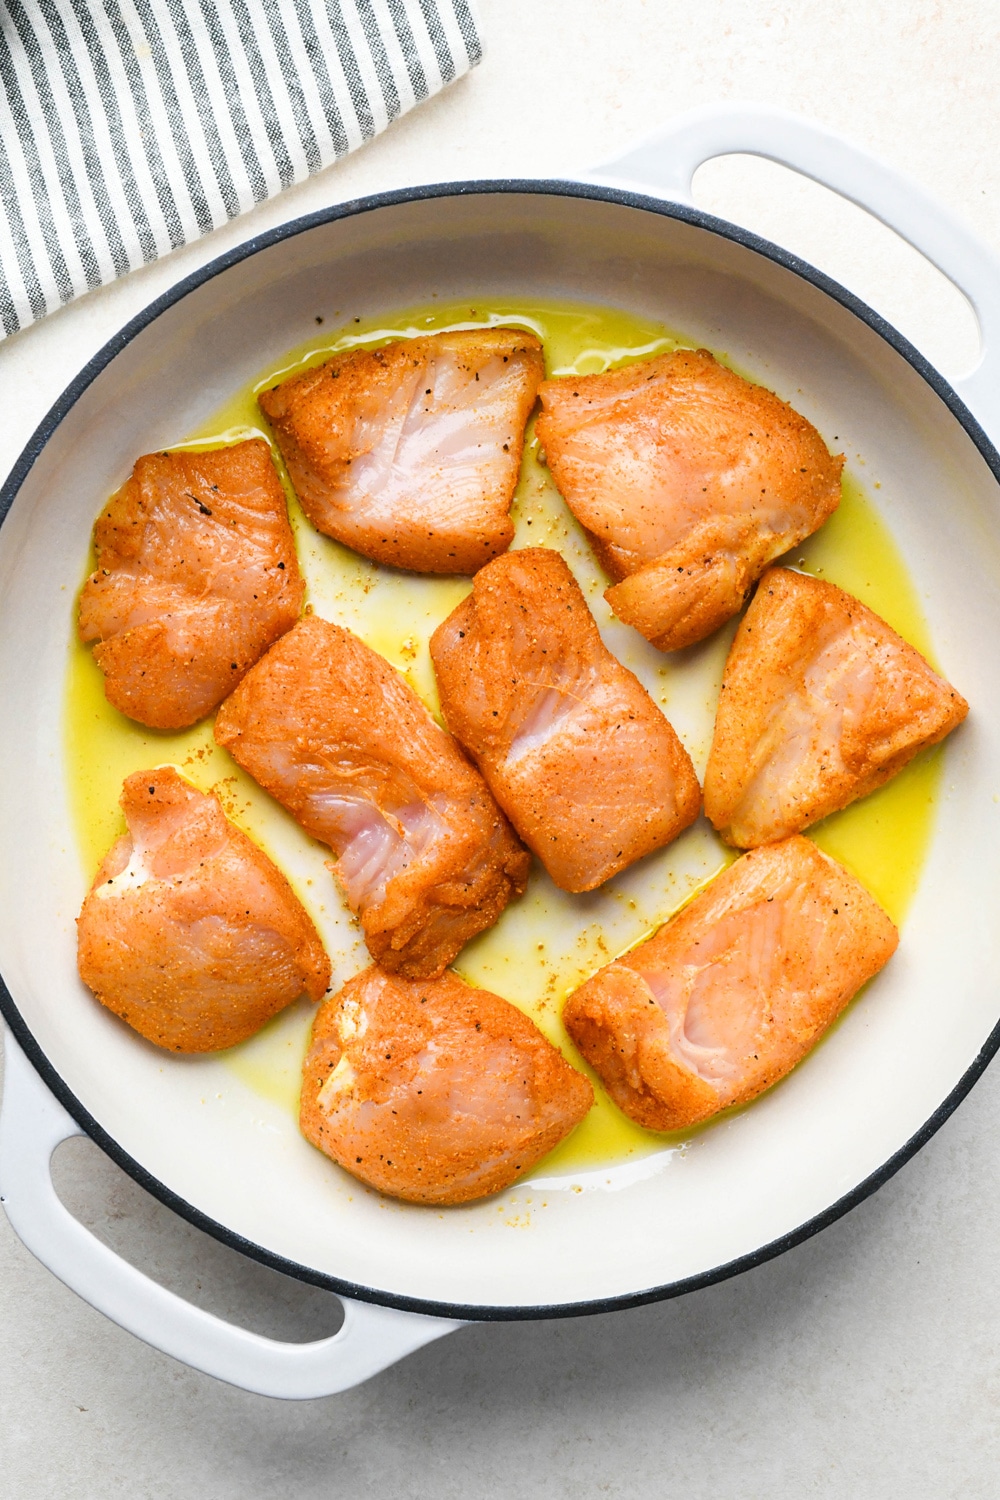 How to make curry chicken and rice: Chicken breast pieces cooking in a skillet in olive oil.